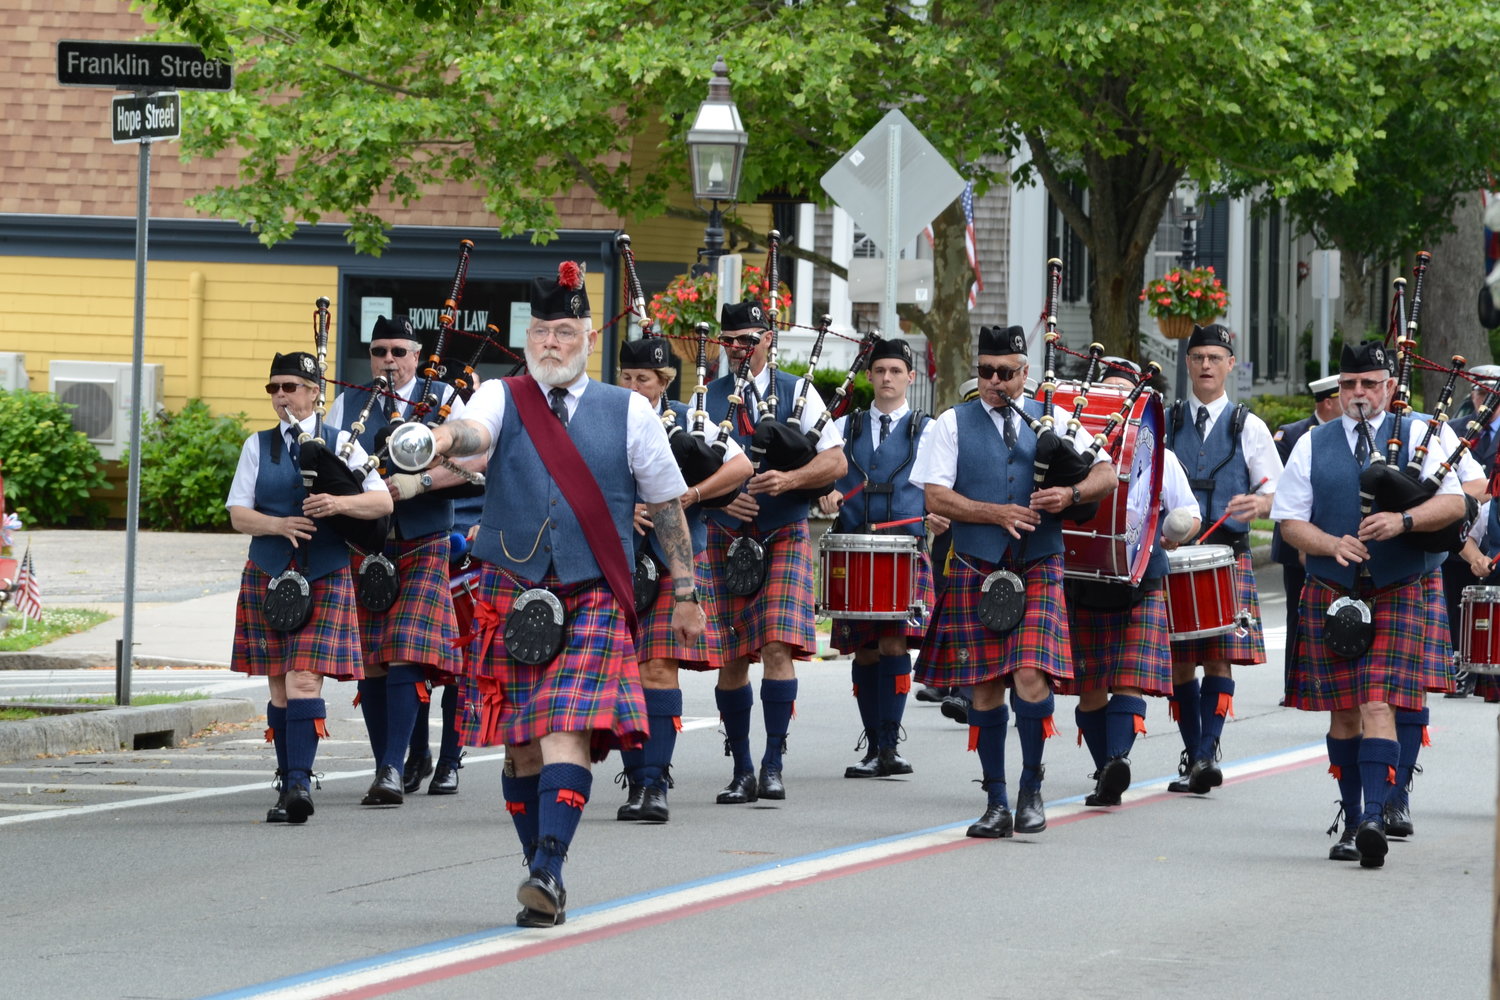 The Rhode Island Highlanders Pipe Band impressed with their marching and bagpipe playing.